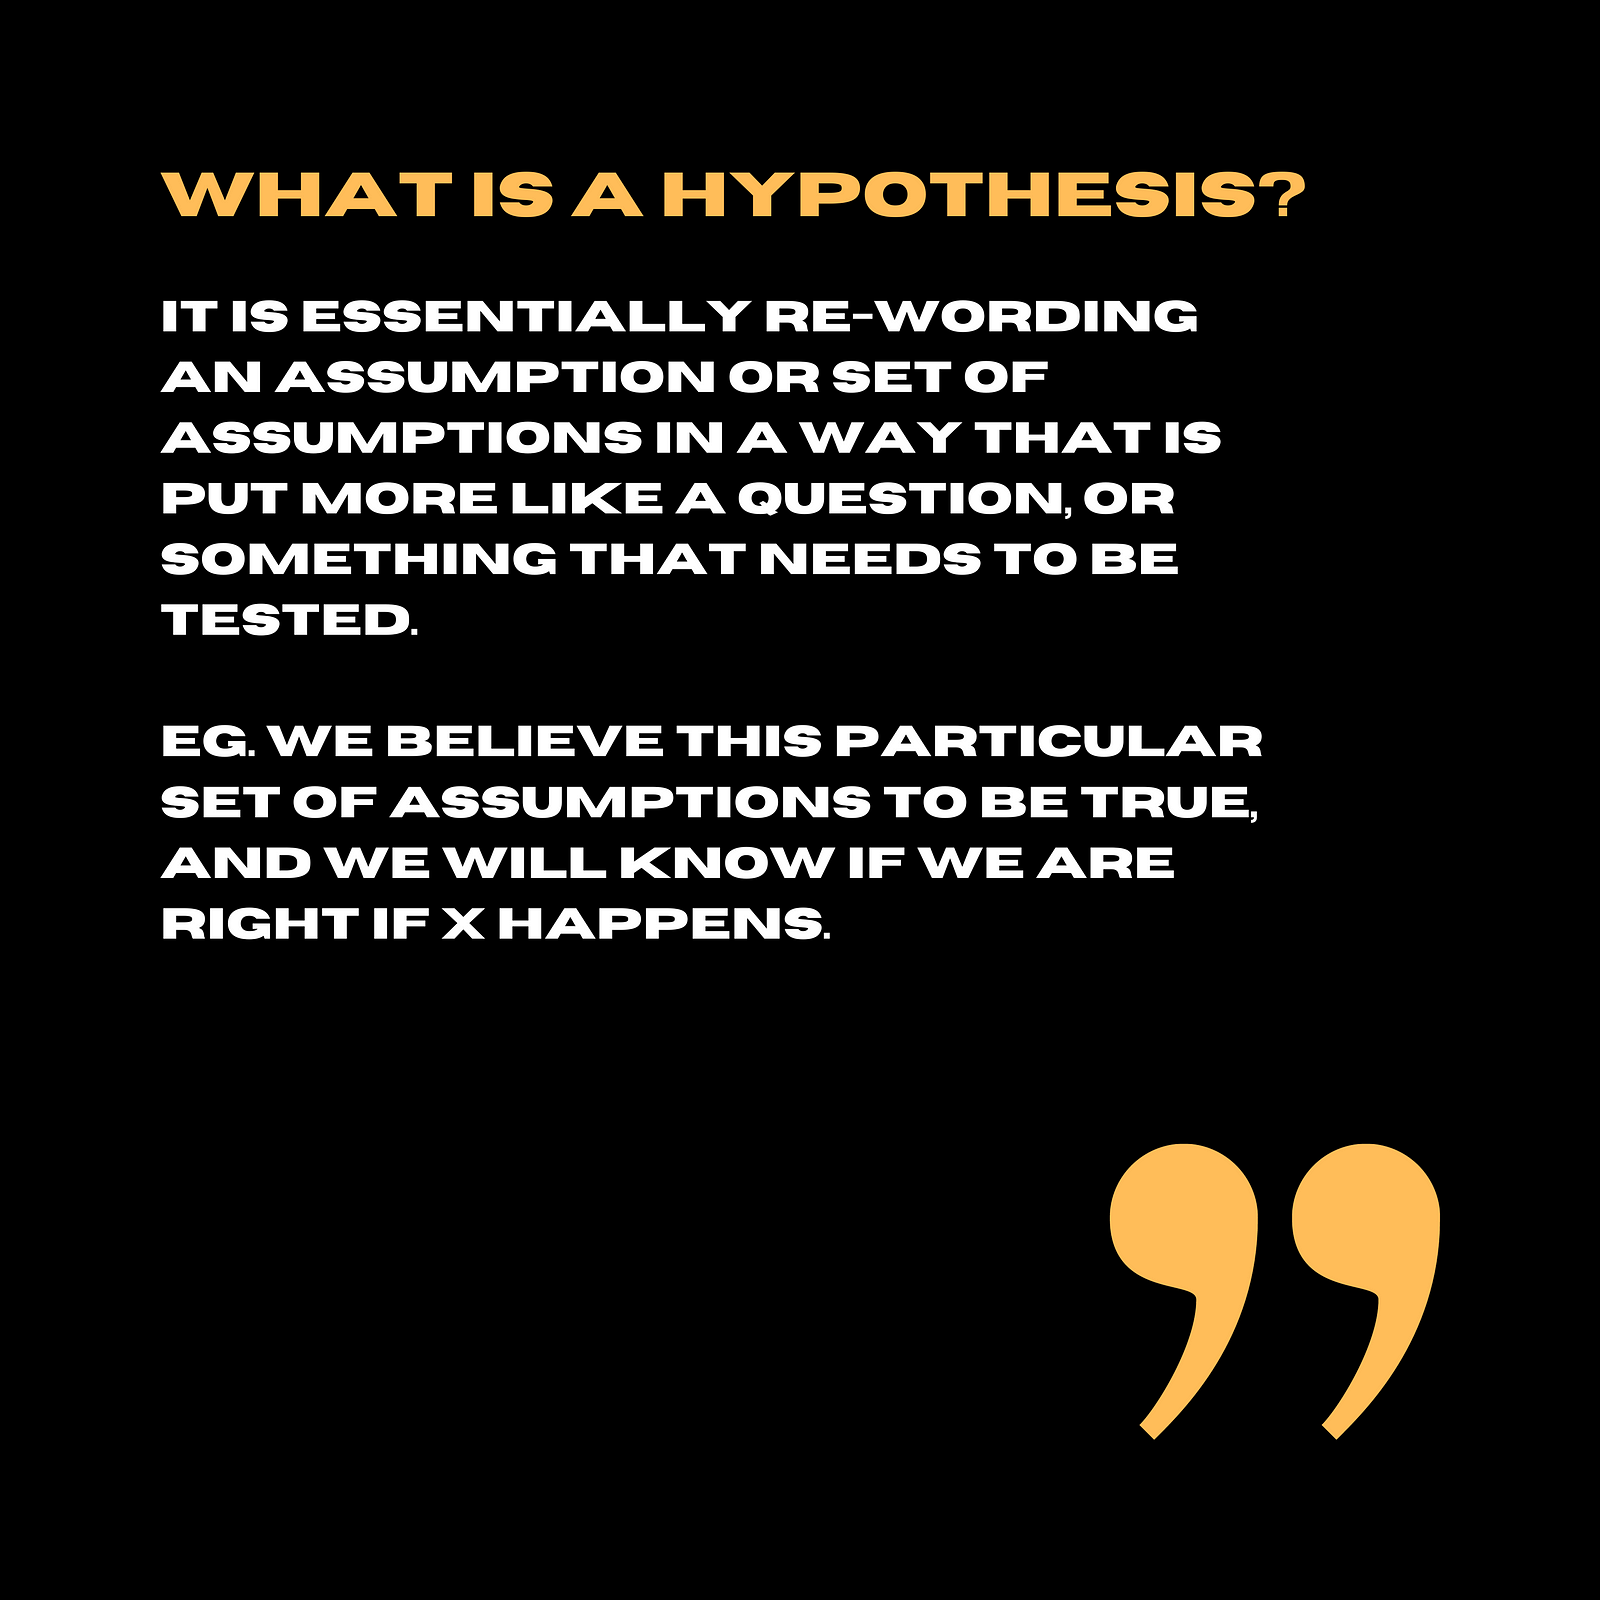 What is a hypothesis - It is essentially re-wording an assumption or set of assumptions in a way that is put more like a question, or something that needs to be tested, eg. we believe this particular set of assumptions to be true, and we will know if we are right if X happens.